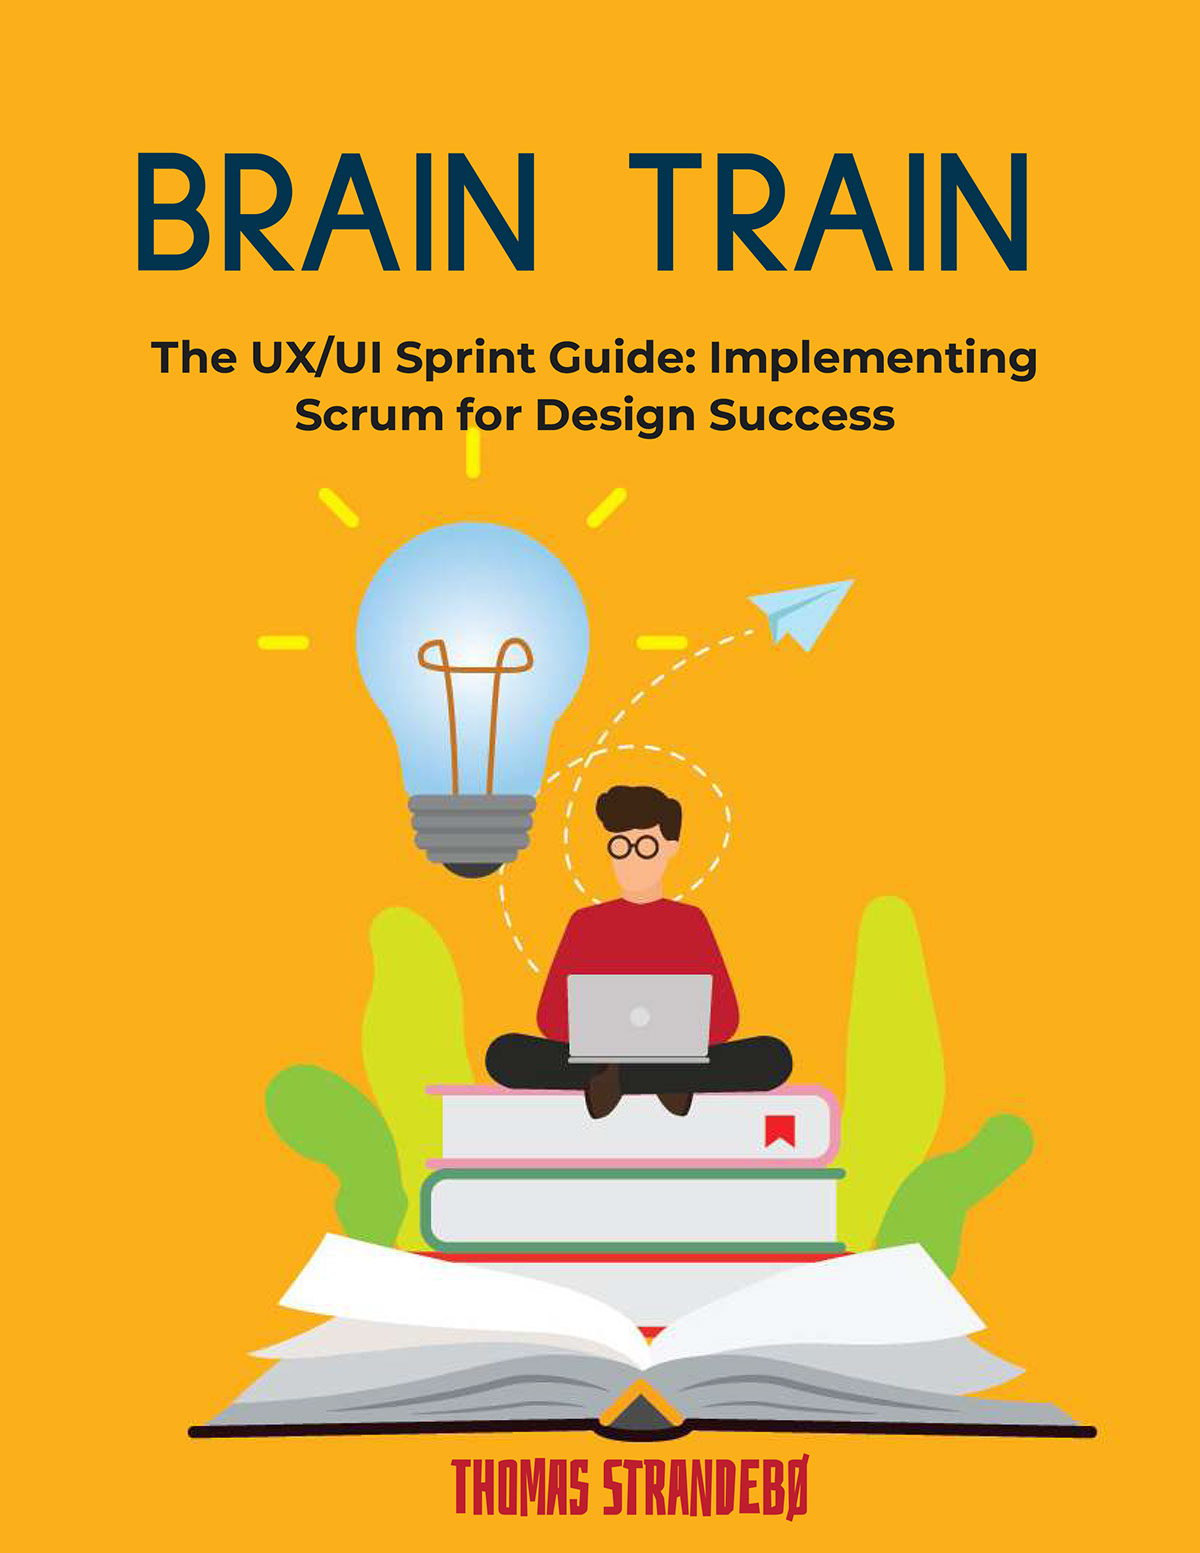 The UX-UI Sprint Guide Implementing Scrum for Design Success rendition image